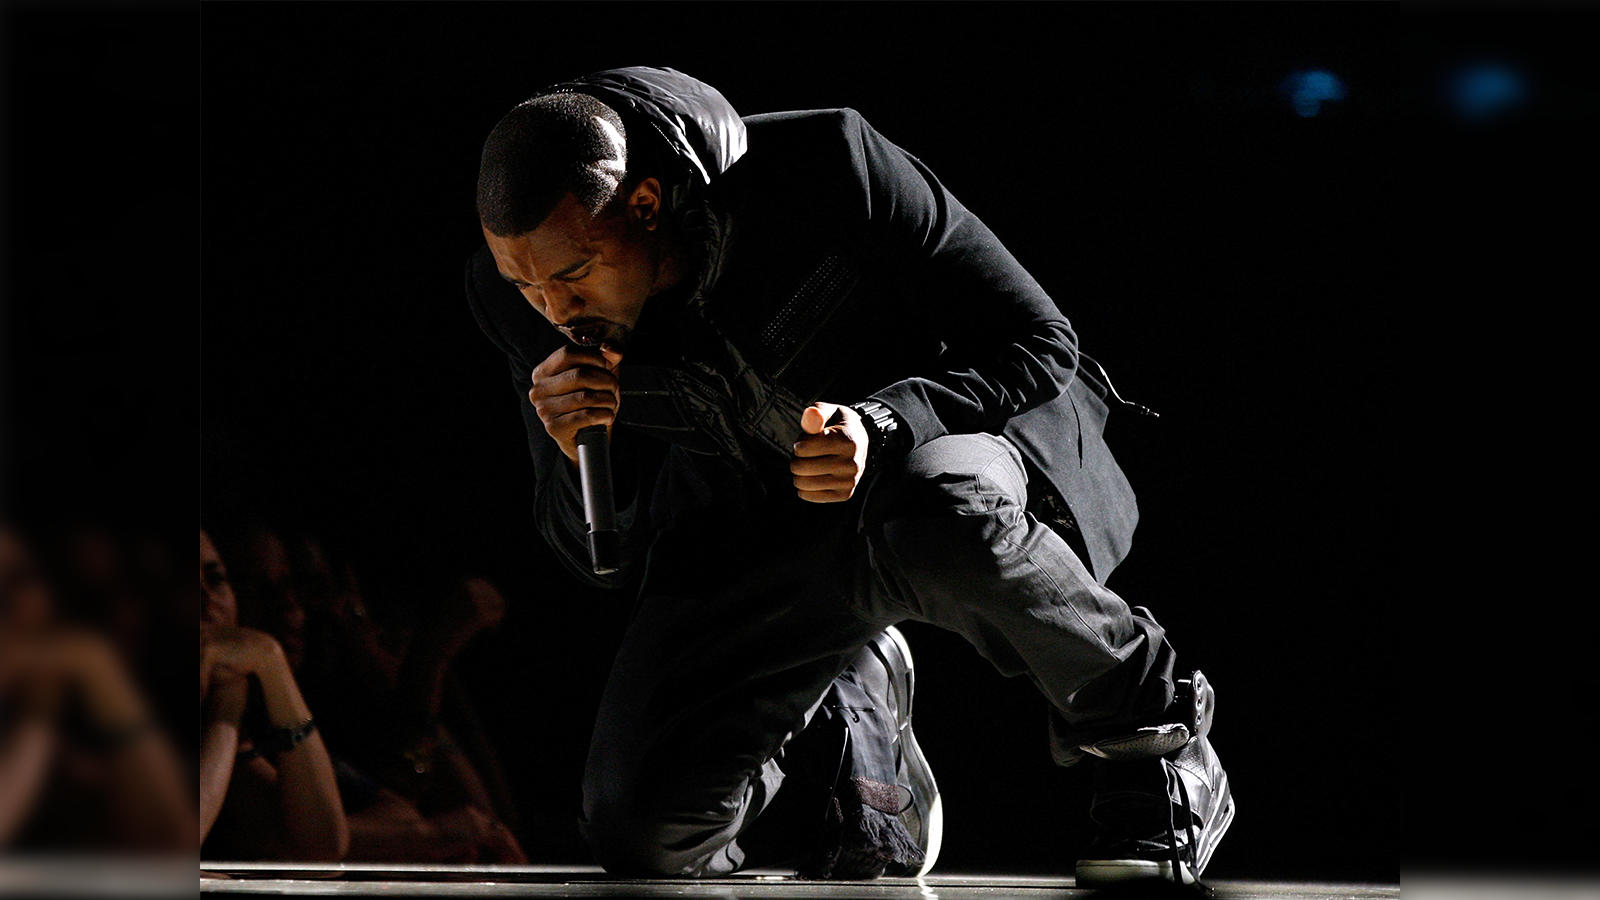 Kanye West's Nike Air Yeezy II Shoes Sell For $93,000 On